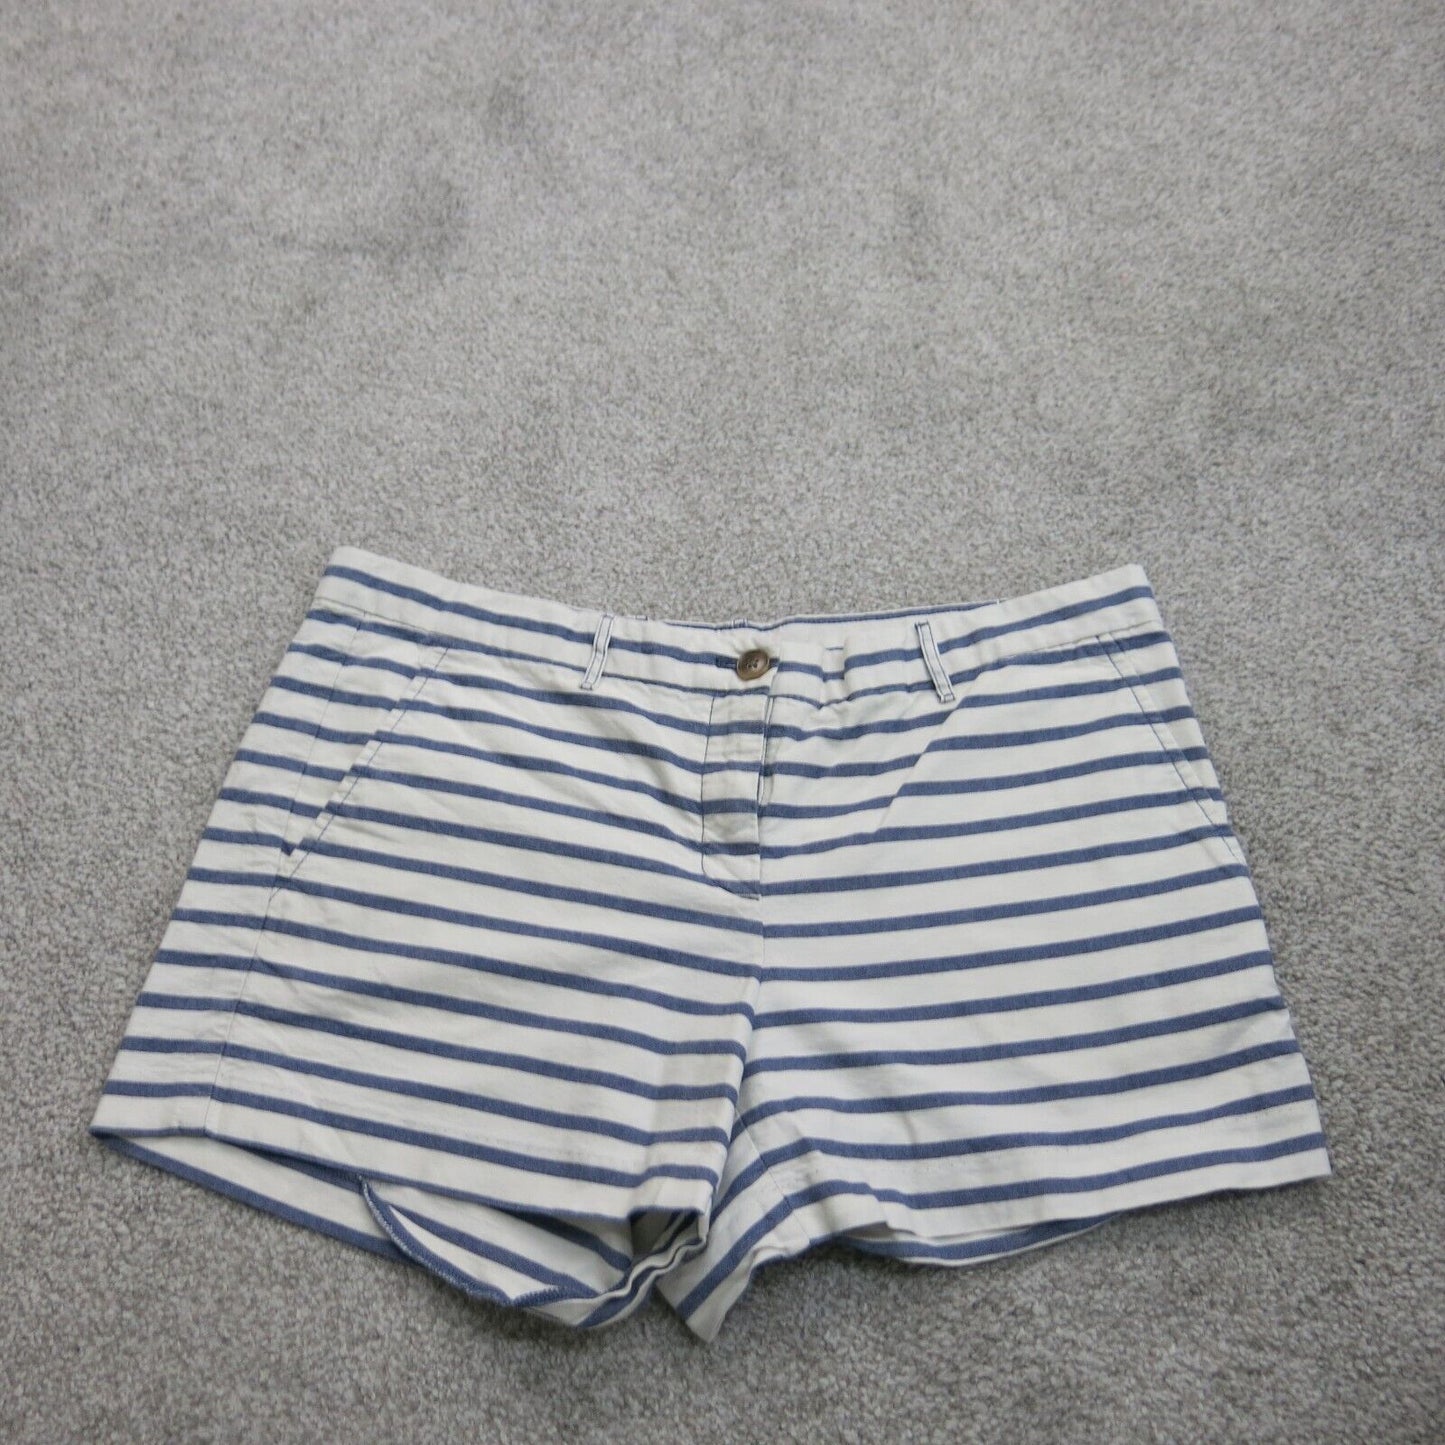 Gap Womens Striped Chino Shorts Mid Rise Flat Front Pockets White Blue Size 8